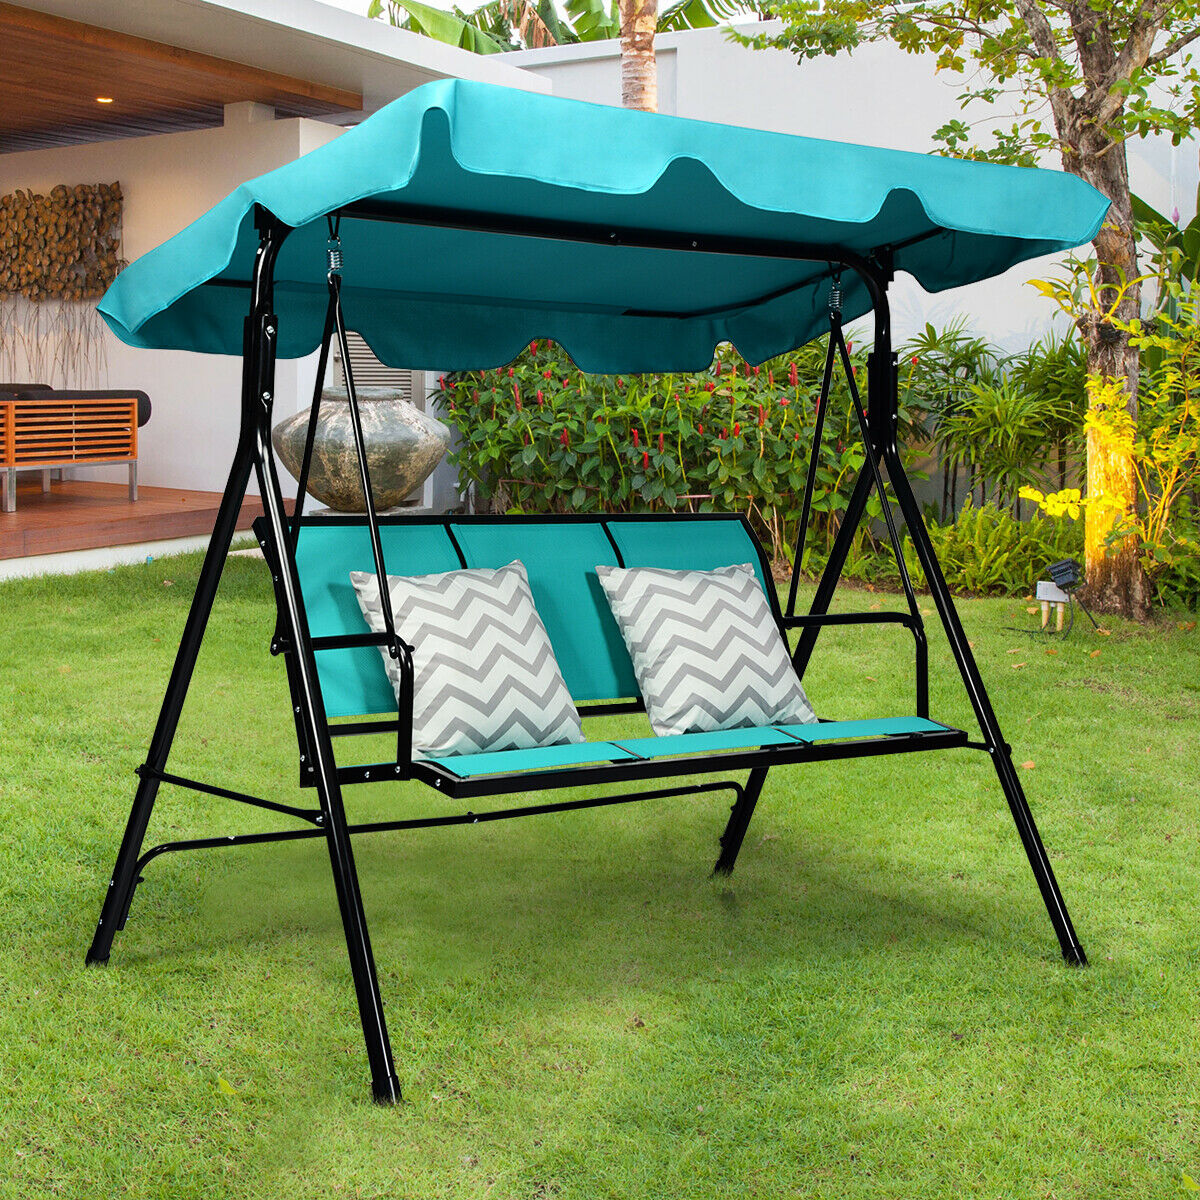 3 Seater Garden Swing Chair with Adjustable Canopy-Blue